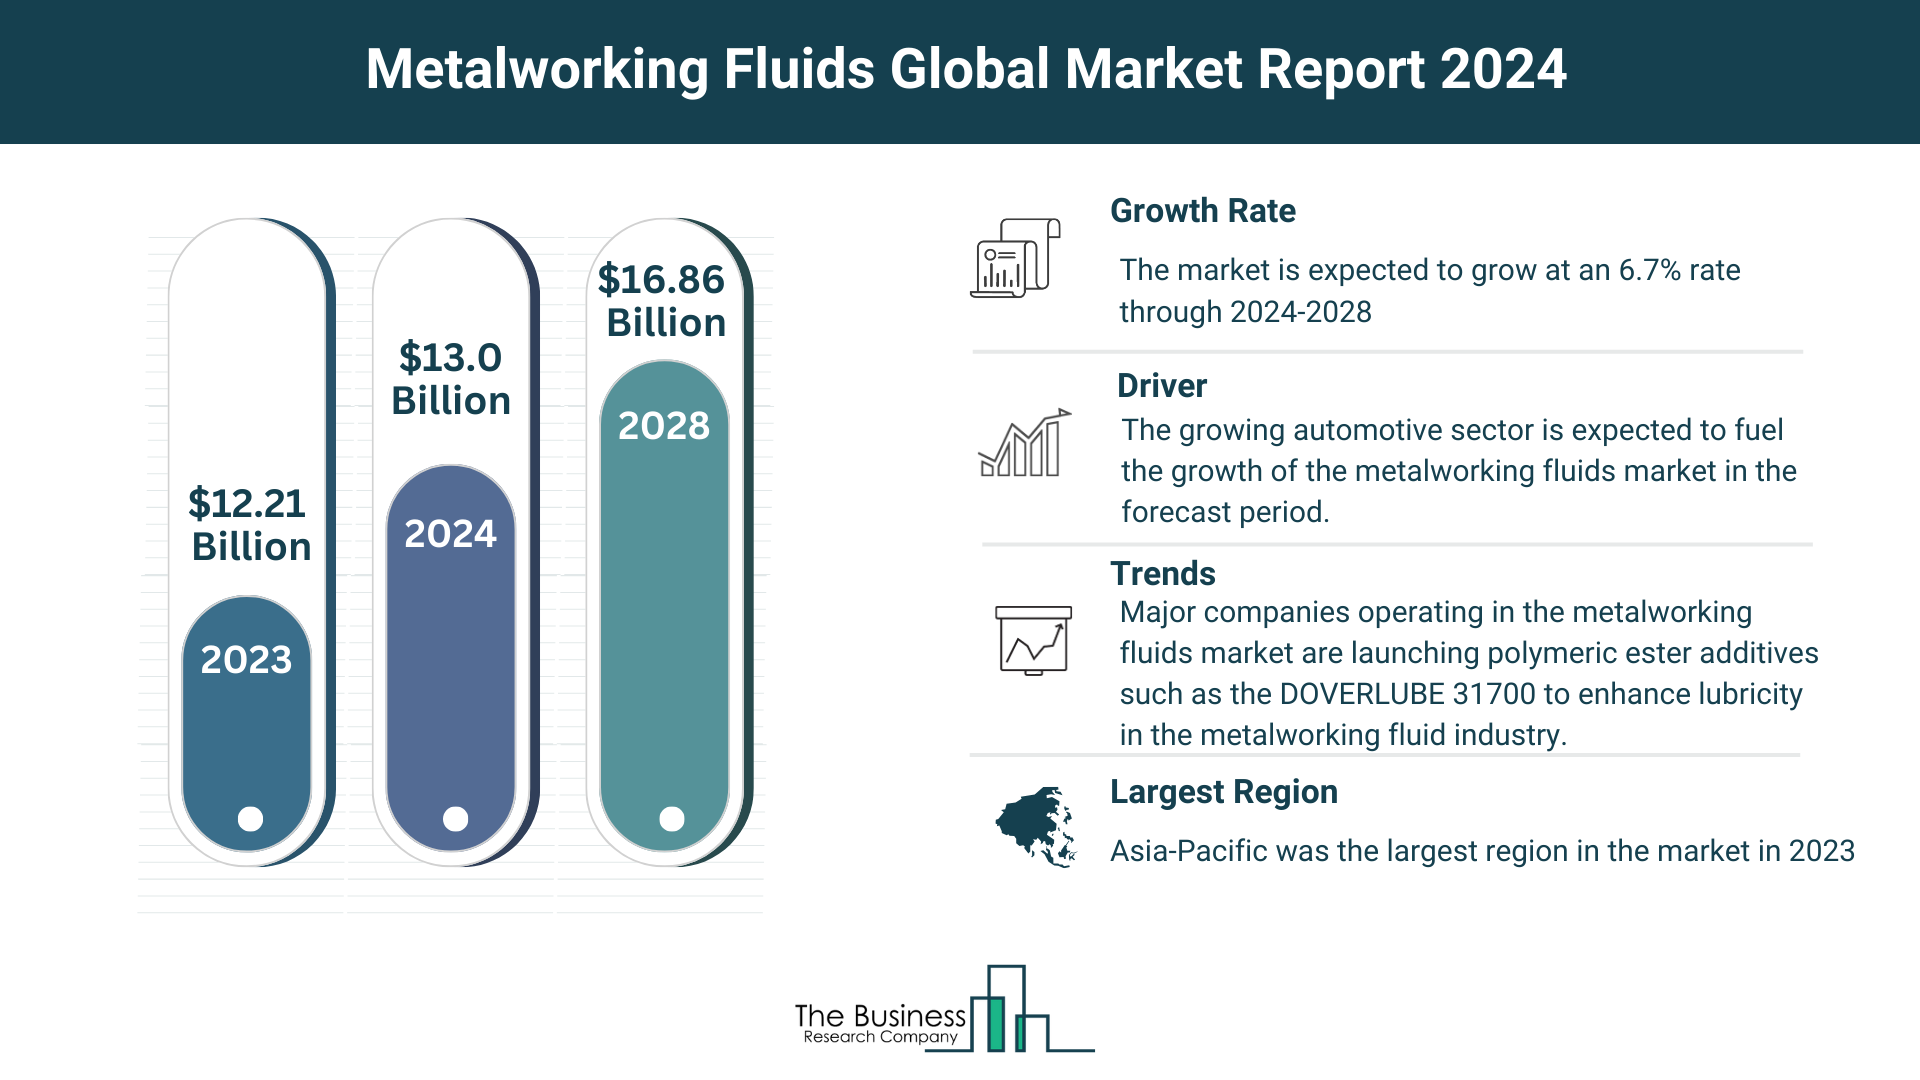 Global Metalworking Fluids Market Analysis: Size, Drivers, Trends, Opportunities And Strategies